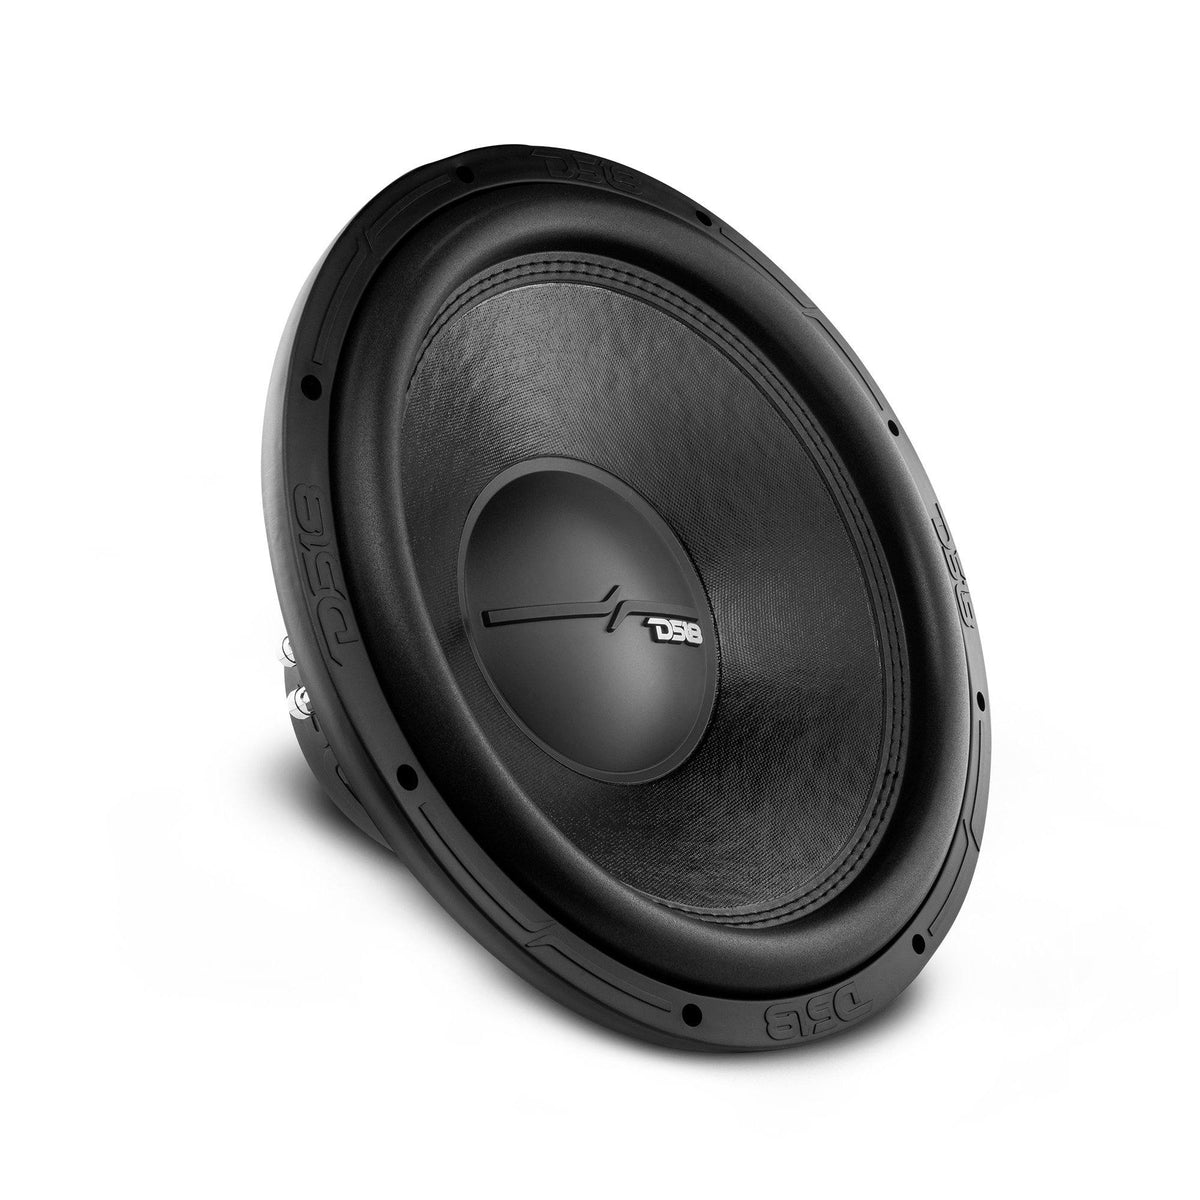 DS18 ELITE-Z 15" Subwoofer with 1500 Watts DVC 4-Ohms audio subwoofers